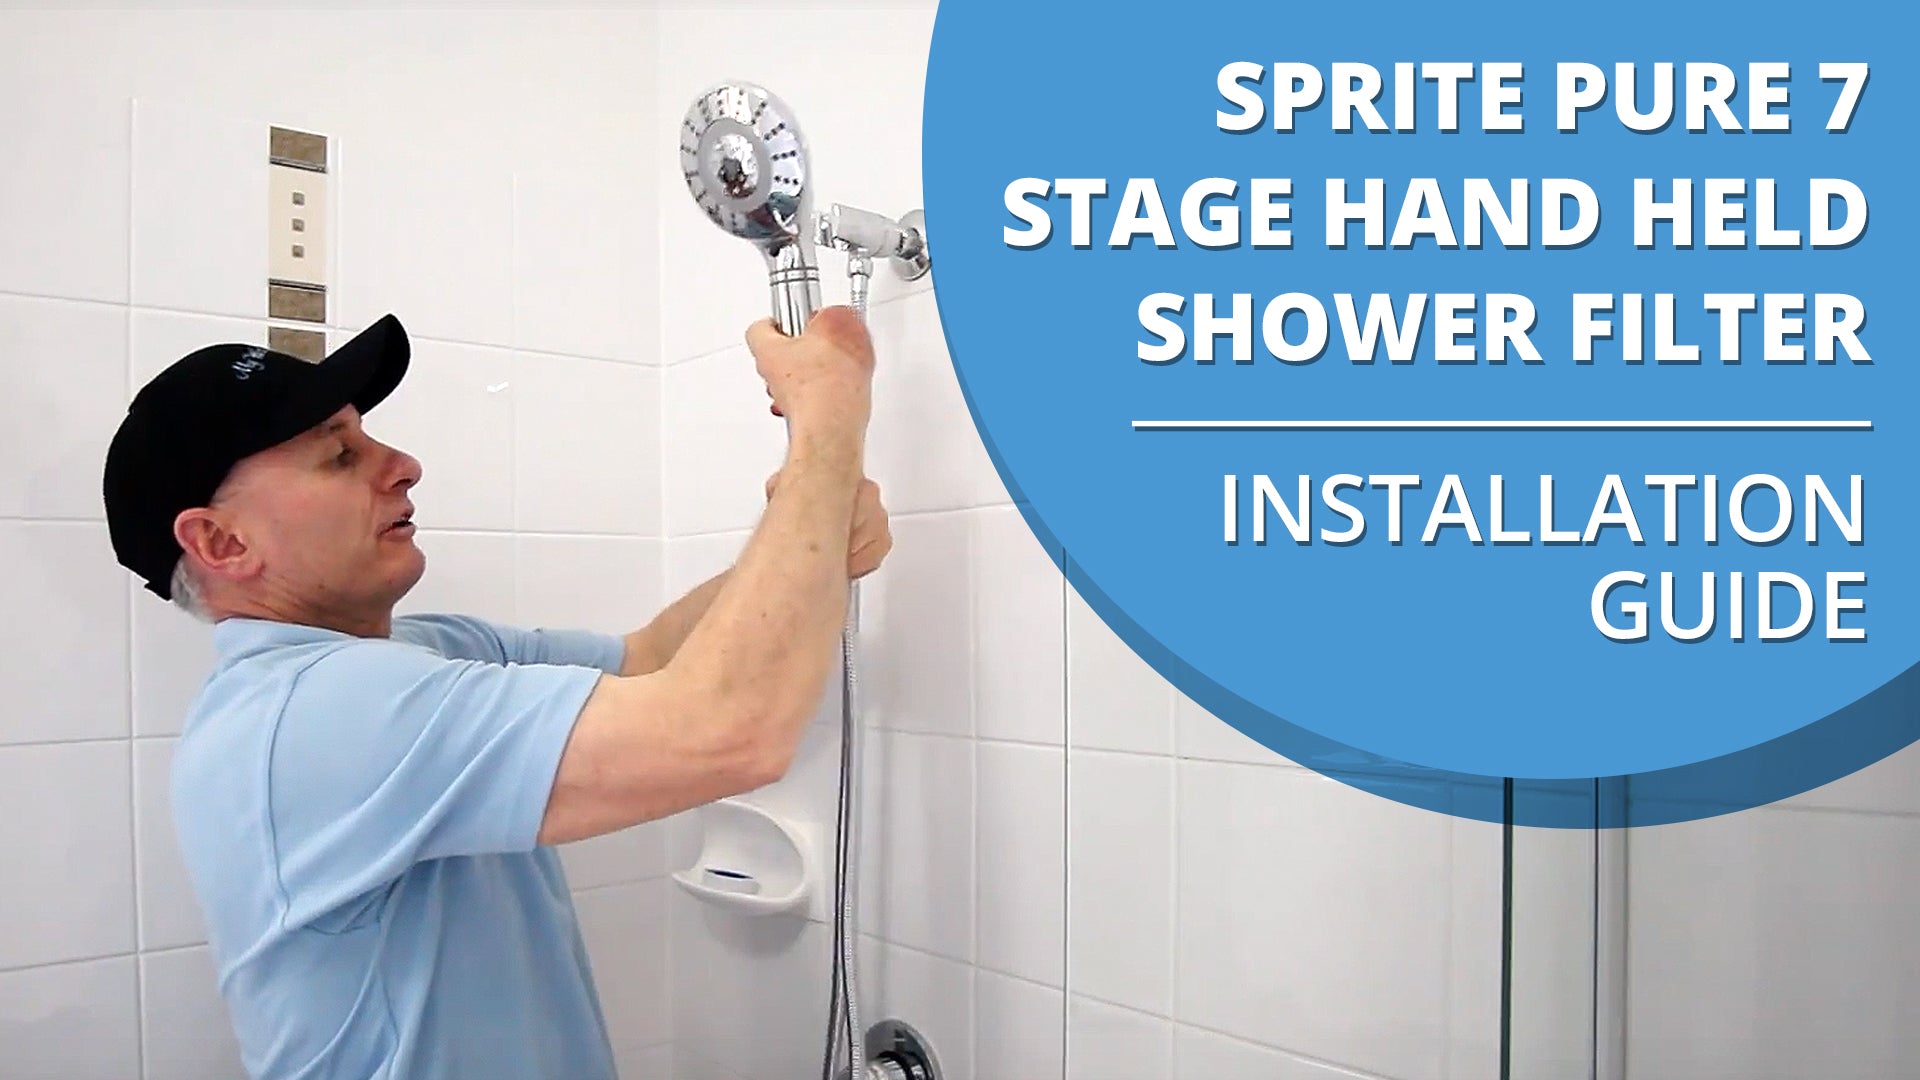 [VIDEO] How to Install a Sprite Shower Pure 7 Stage Hand Held Shower Filter